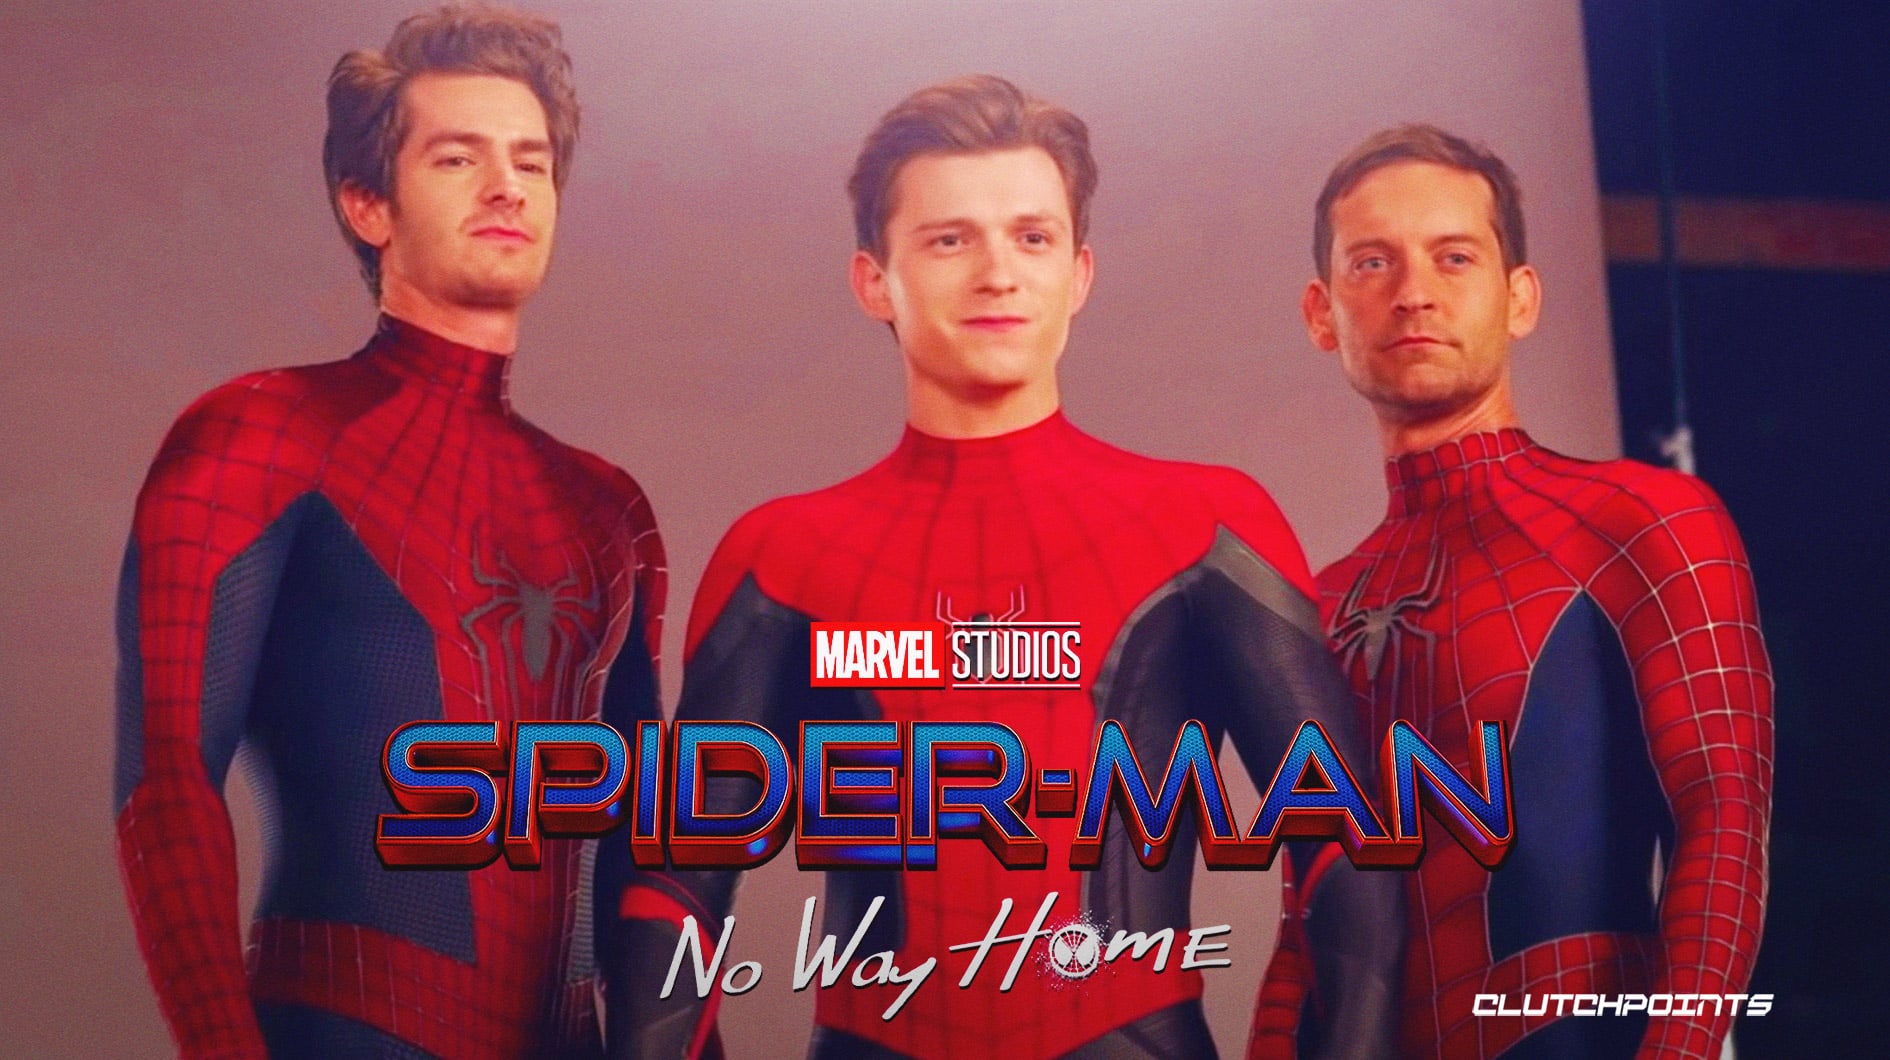 Andrew Garfield, Tom Holland, Tobey Maguire, Spider-Man: No Way Home